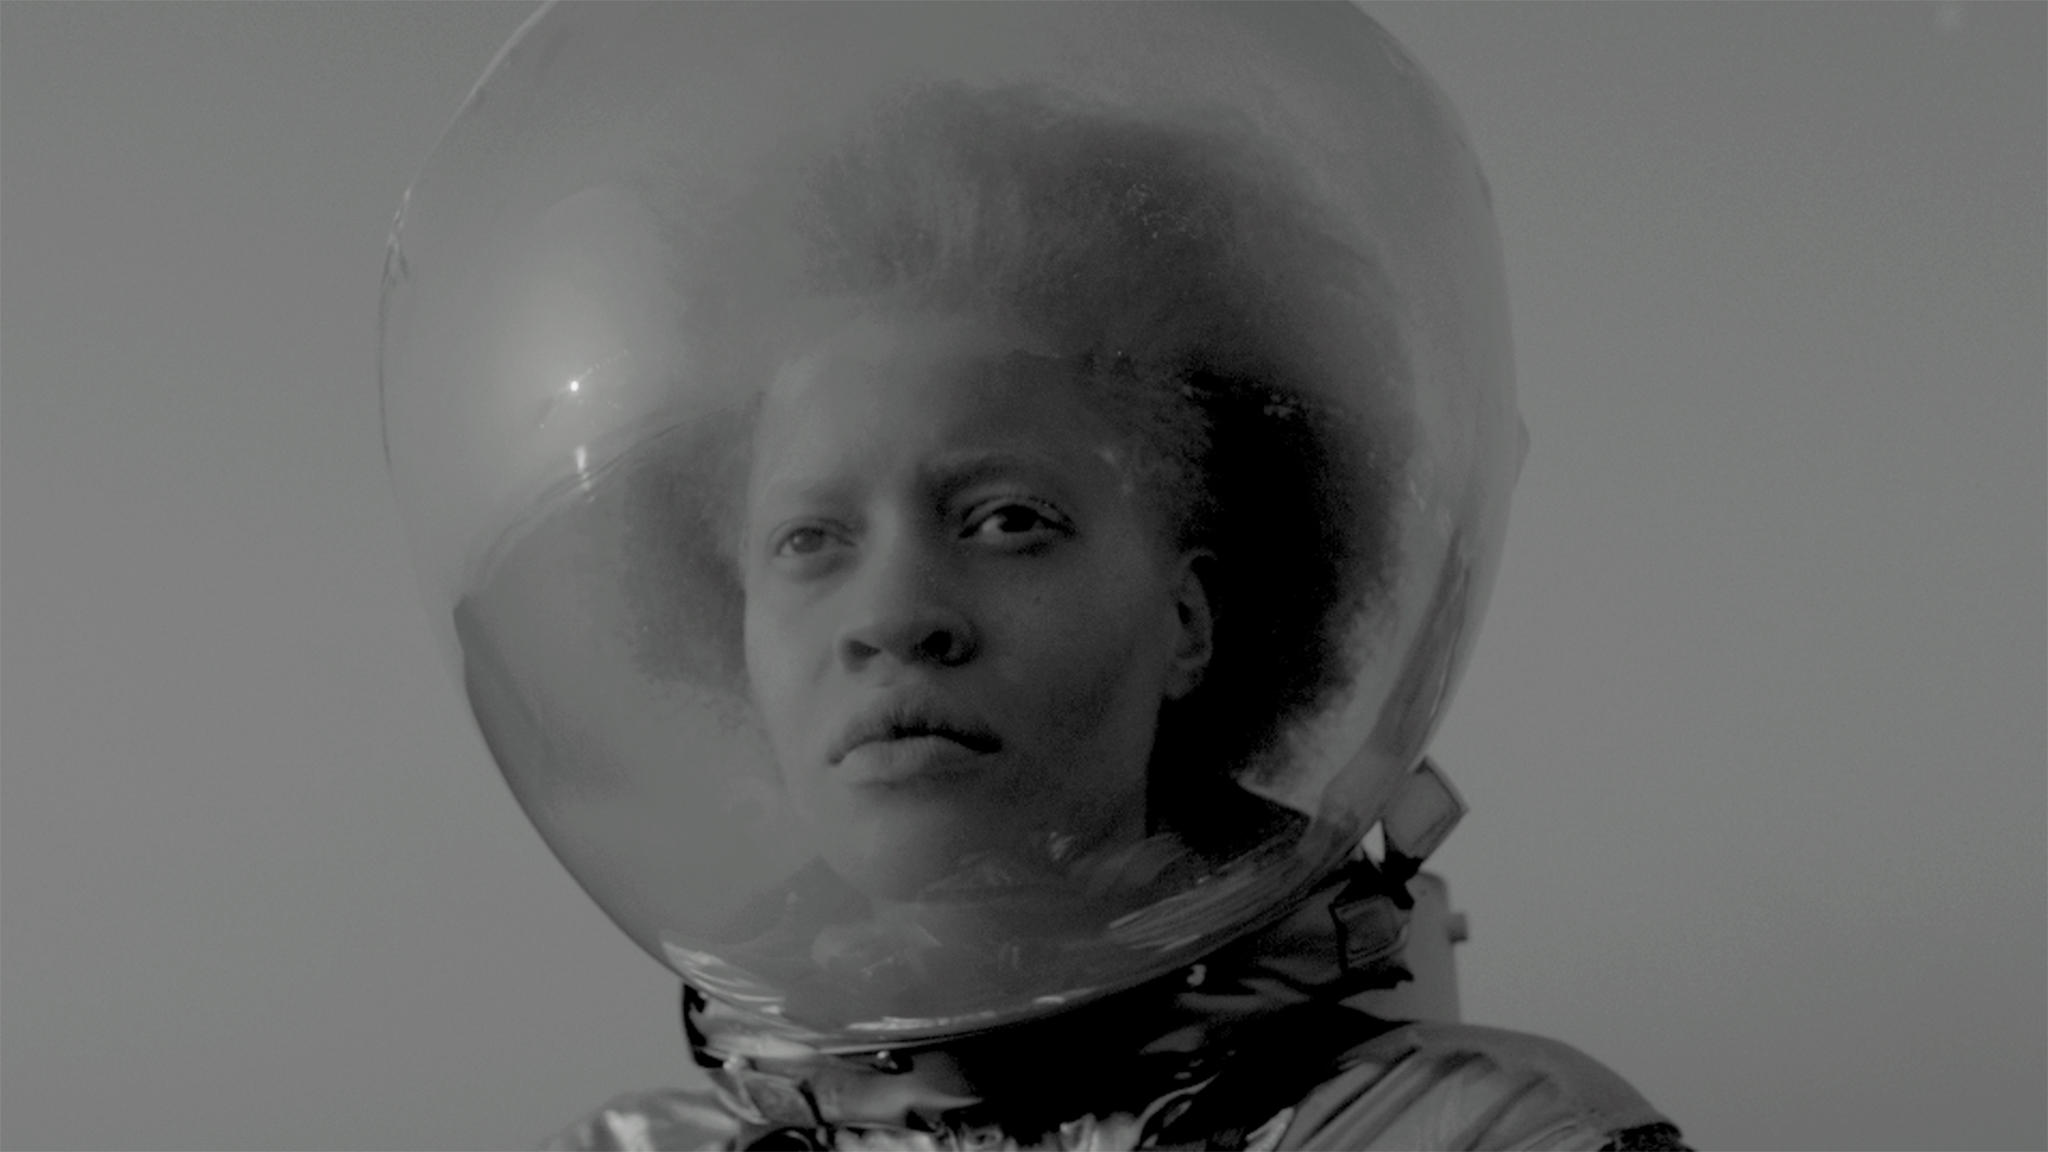 A black-and-white still image of an astronaut in a suit from the film 